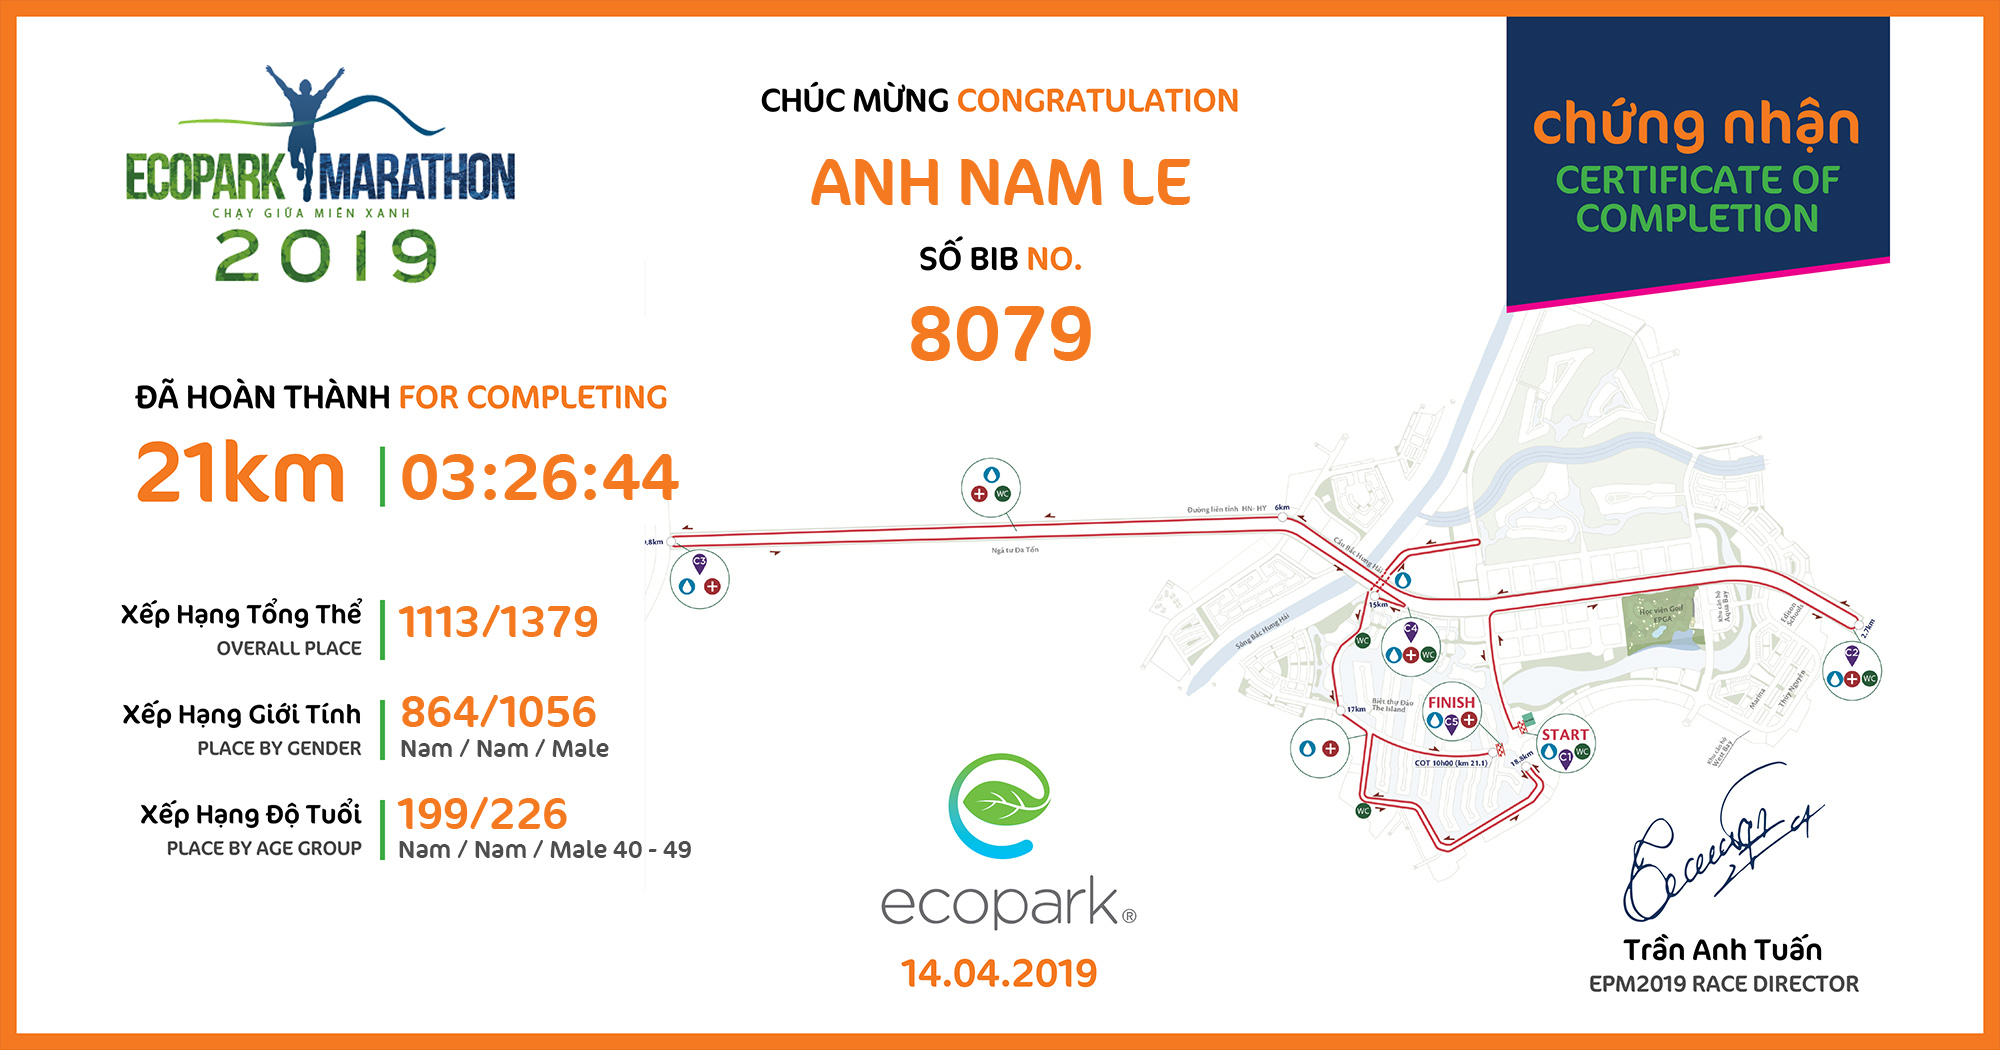 8079 - Anh Nam Le